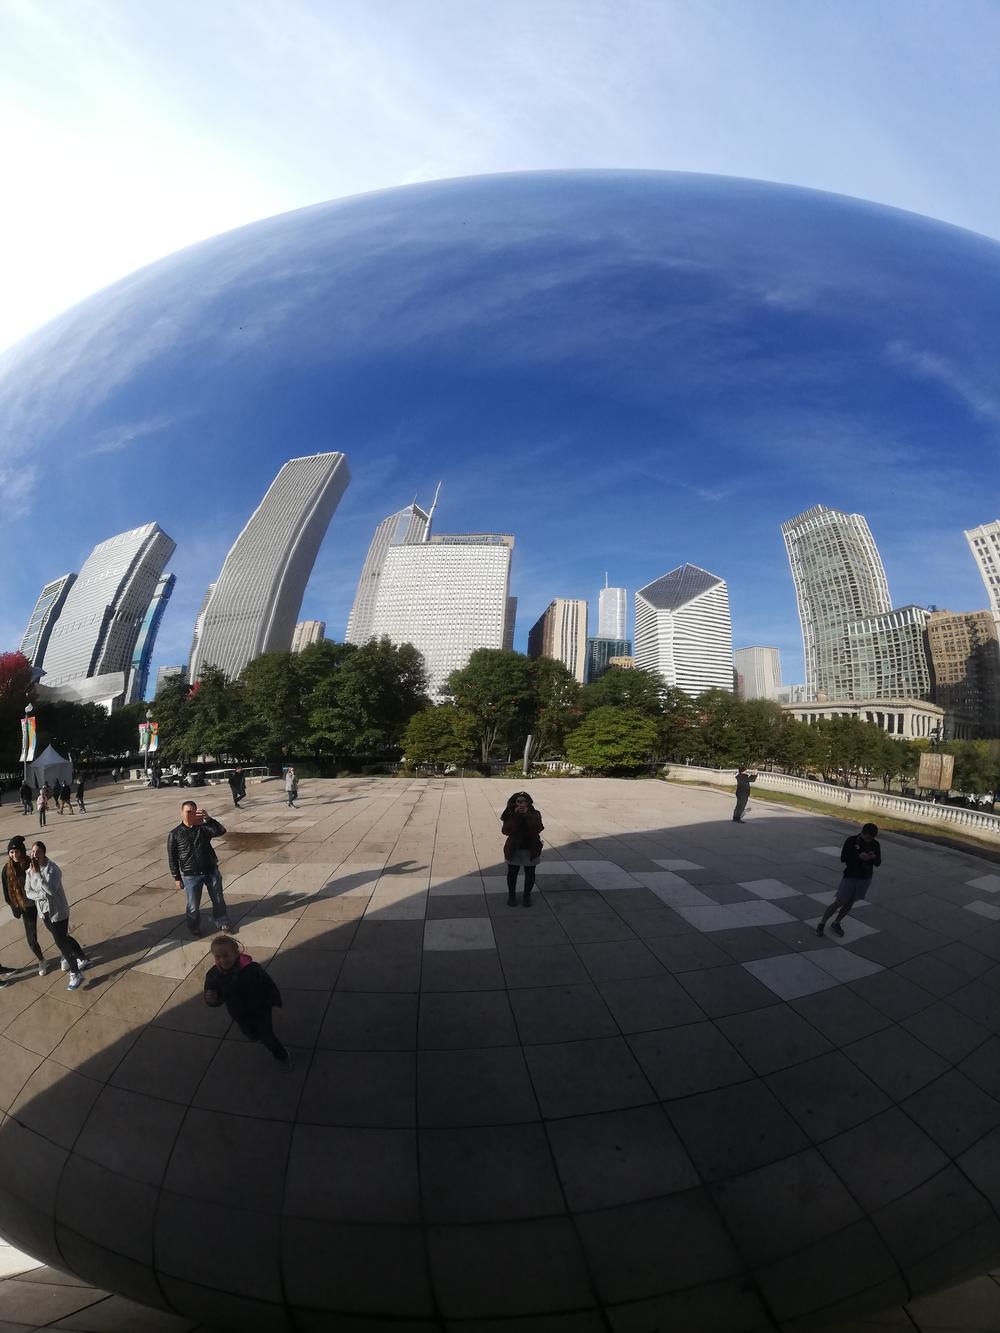 The skyscrapers of Chicago are reflected in the famous public sculpture dubbed “The Bean.”